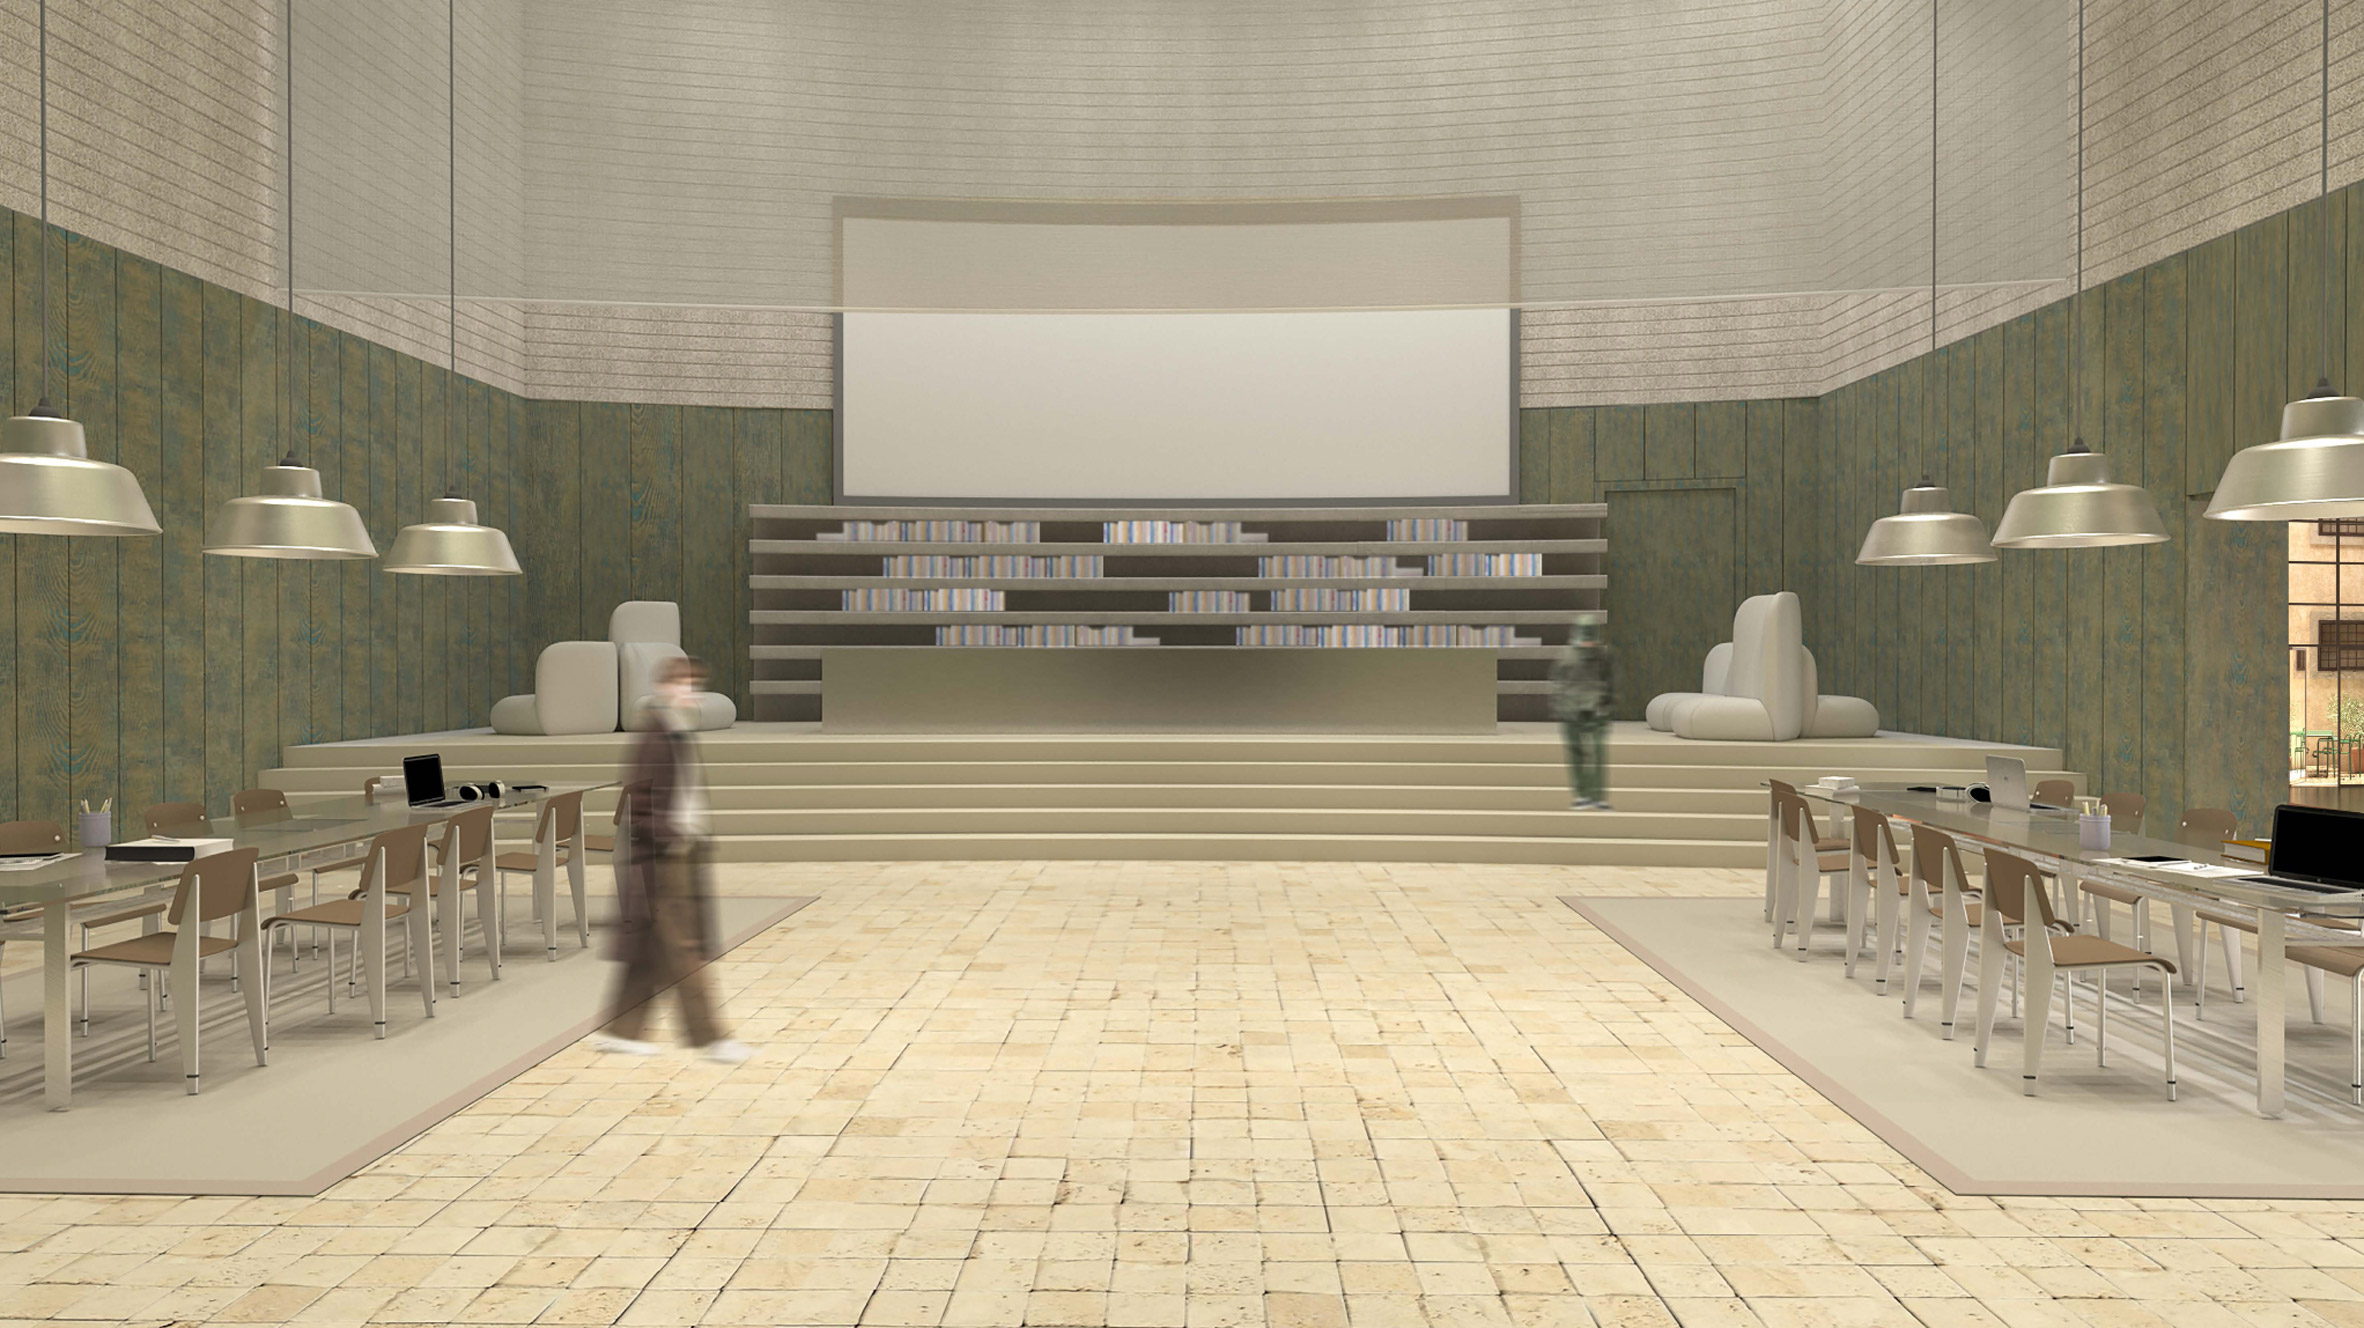 Visualisation of building interior with figures